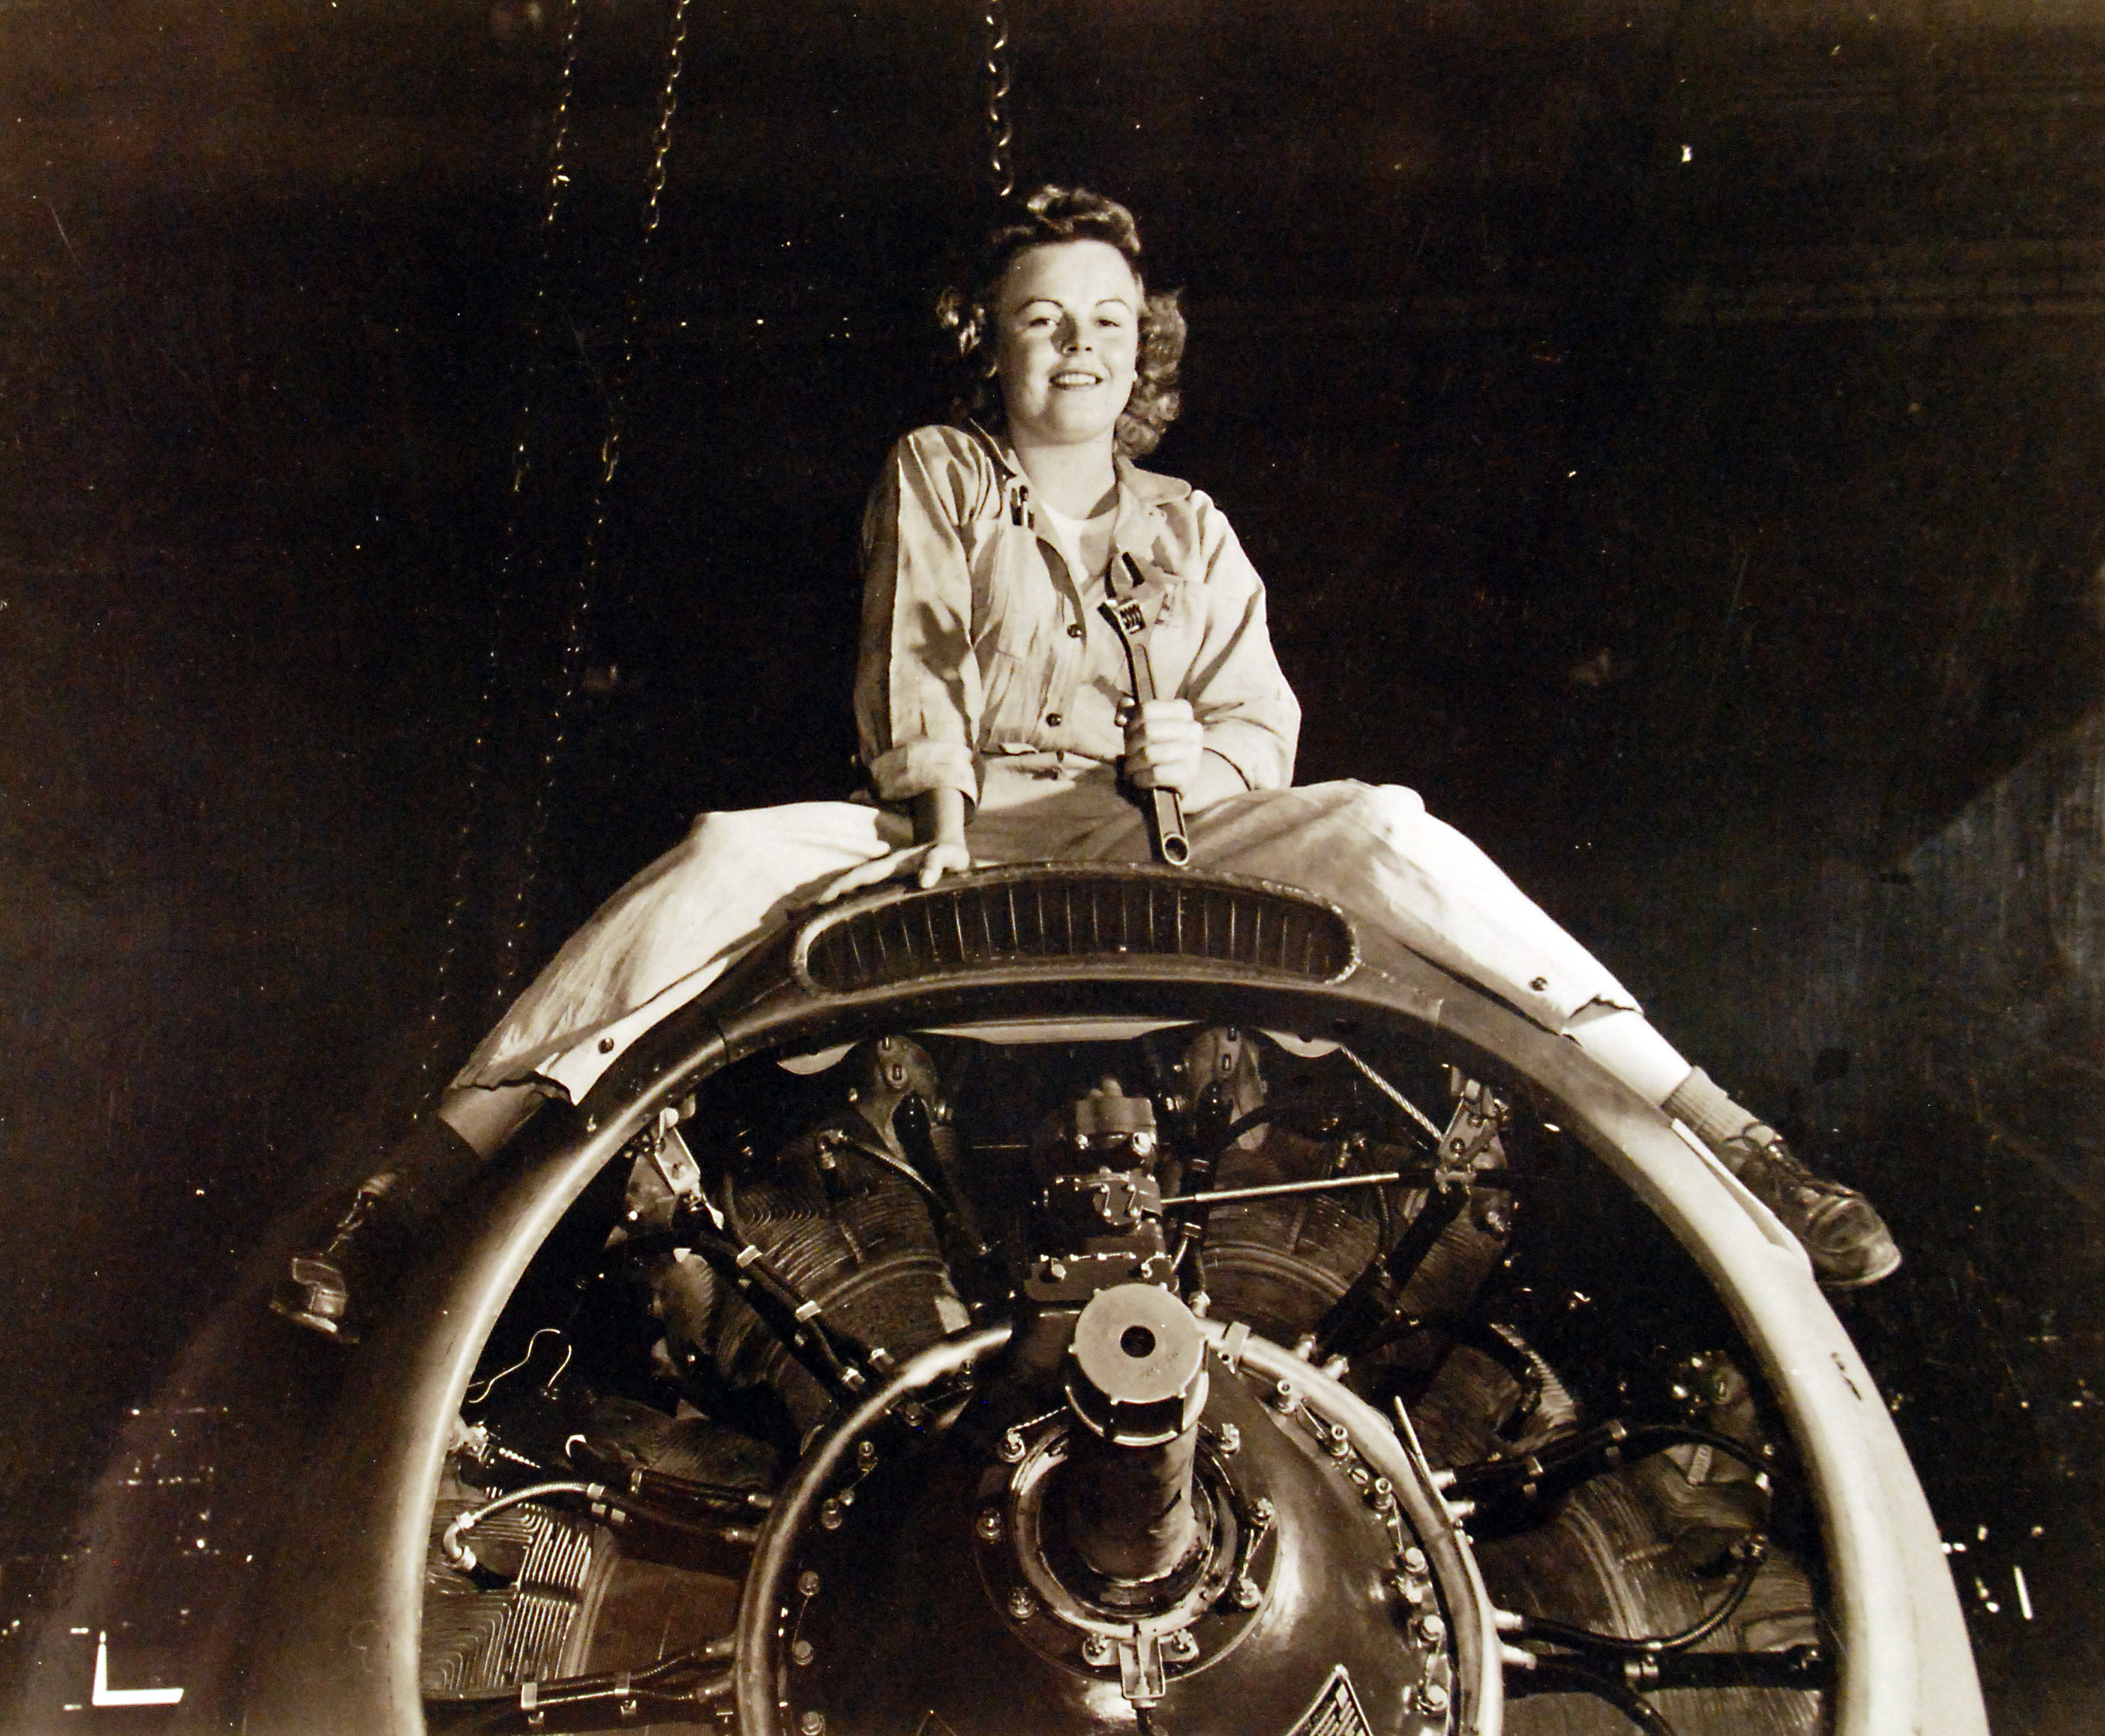 Check Out What Barbara Warfield and Naval Aircraft Looked Like  on 9/28/1943 